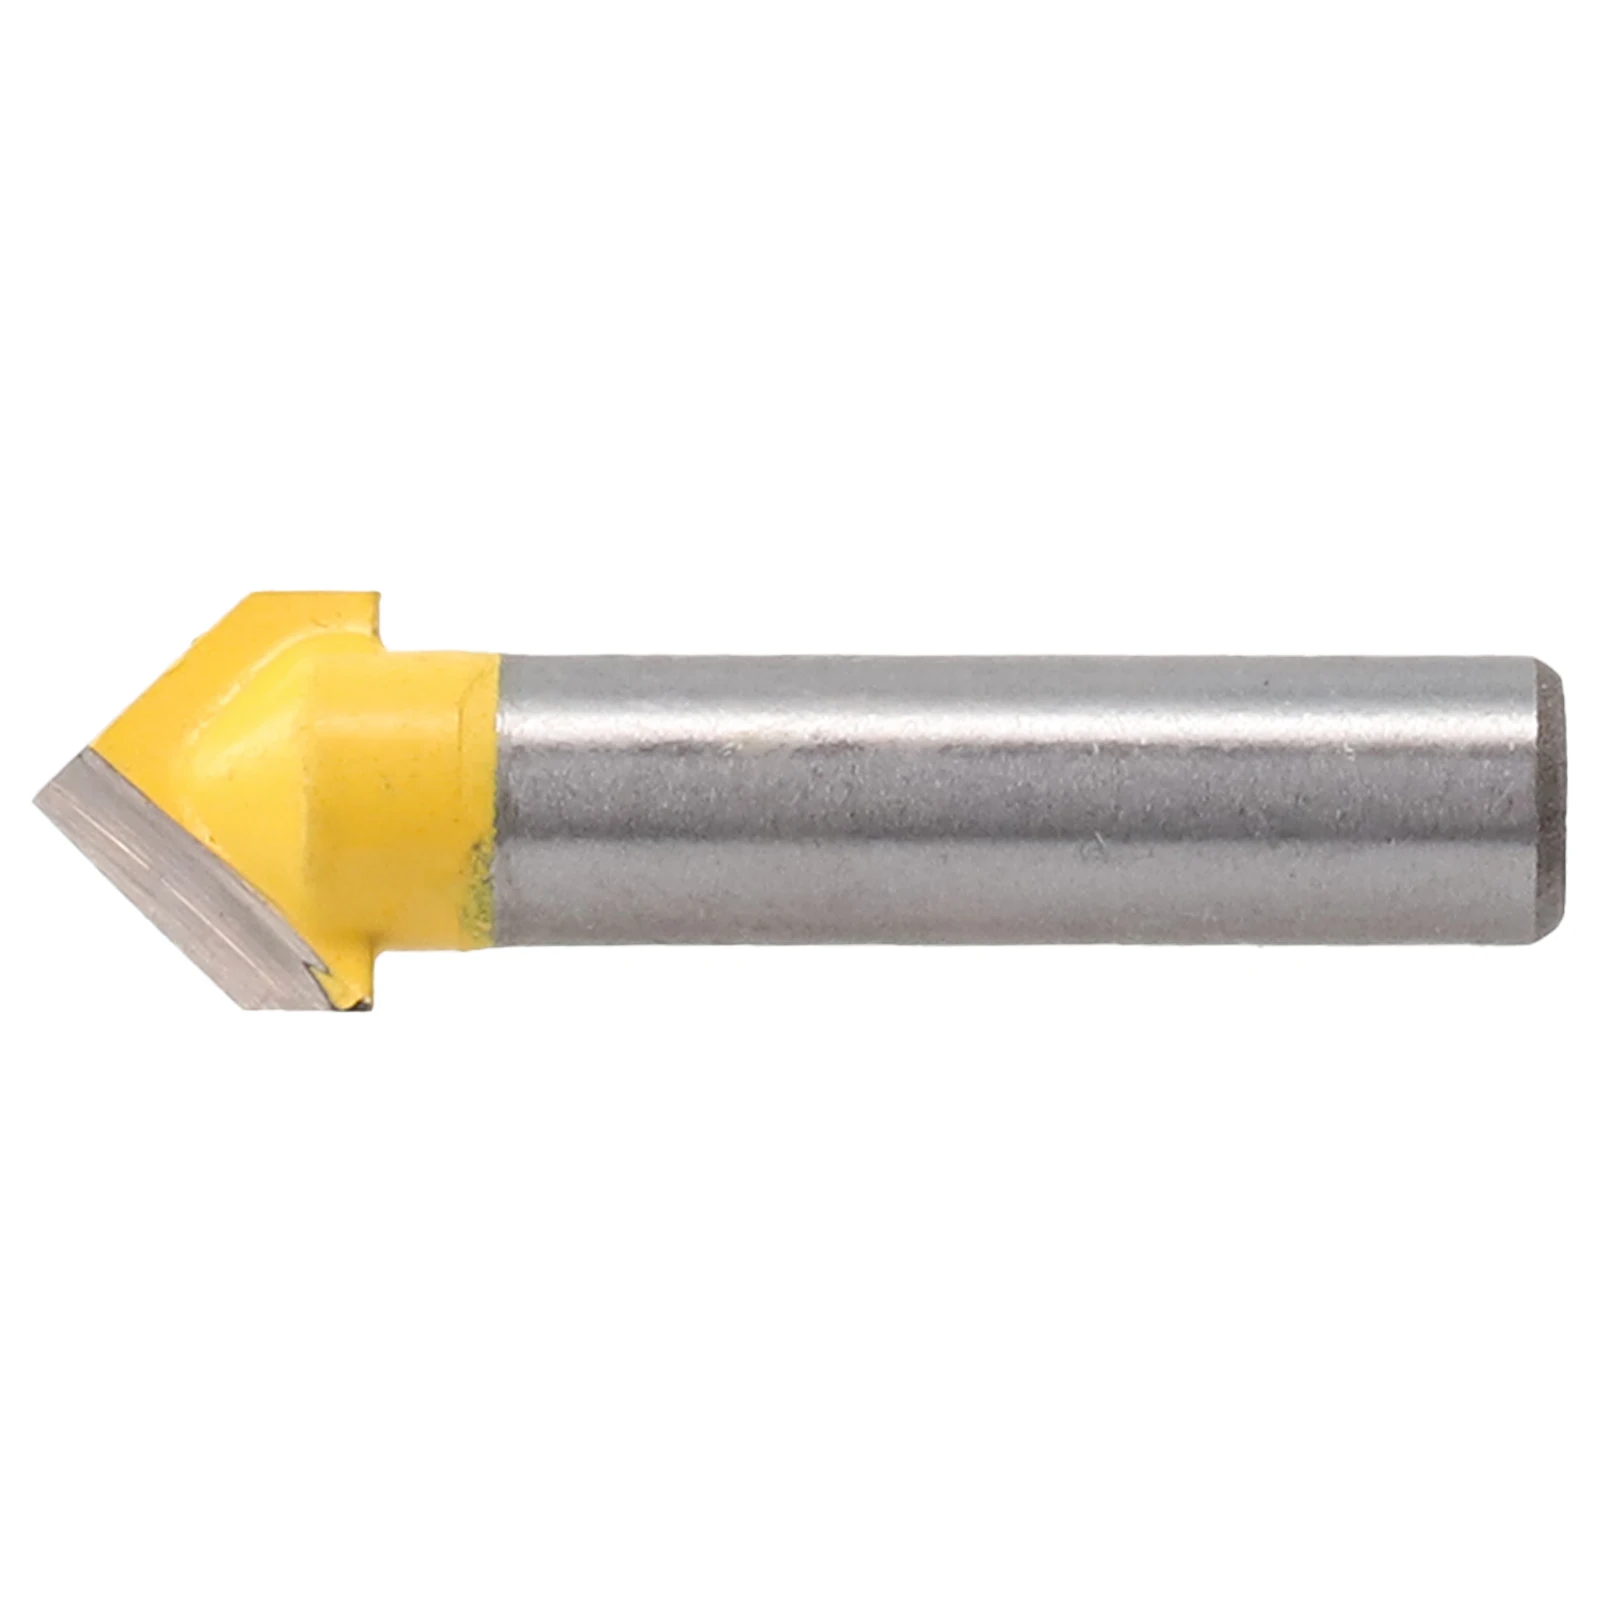 

1pc 8mm Shank 90 Degree V-Shaped Router Bit Carbide End Mill V Type Slotting Cutter Woodworking Engraving Milling Cutter